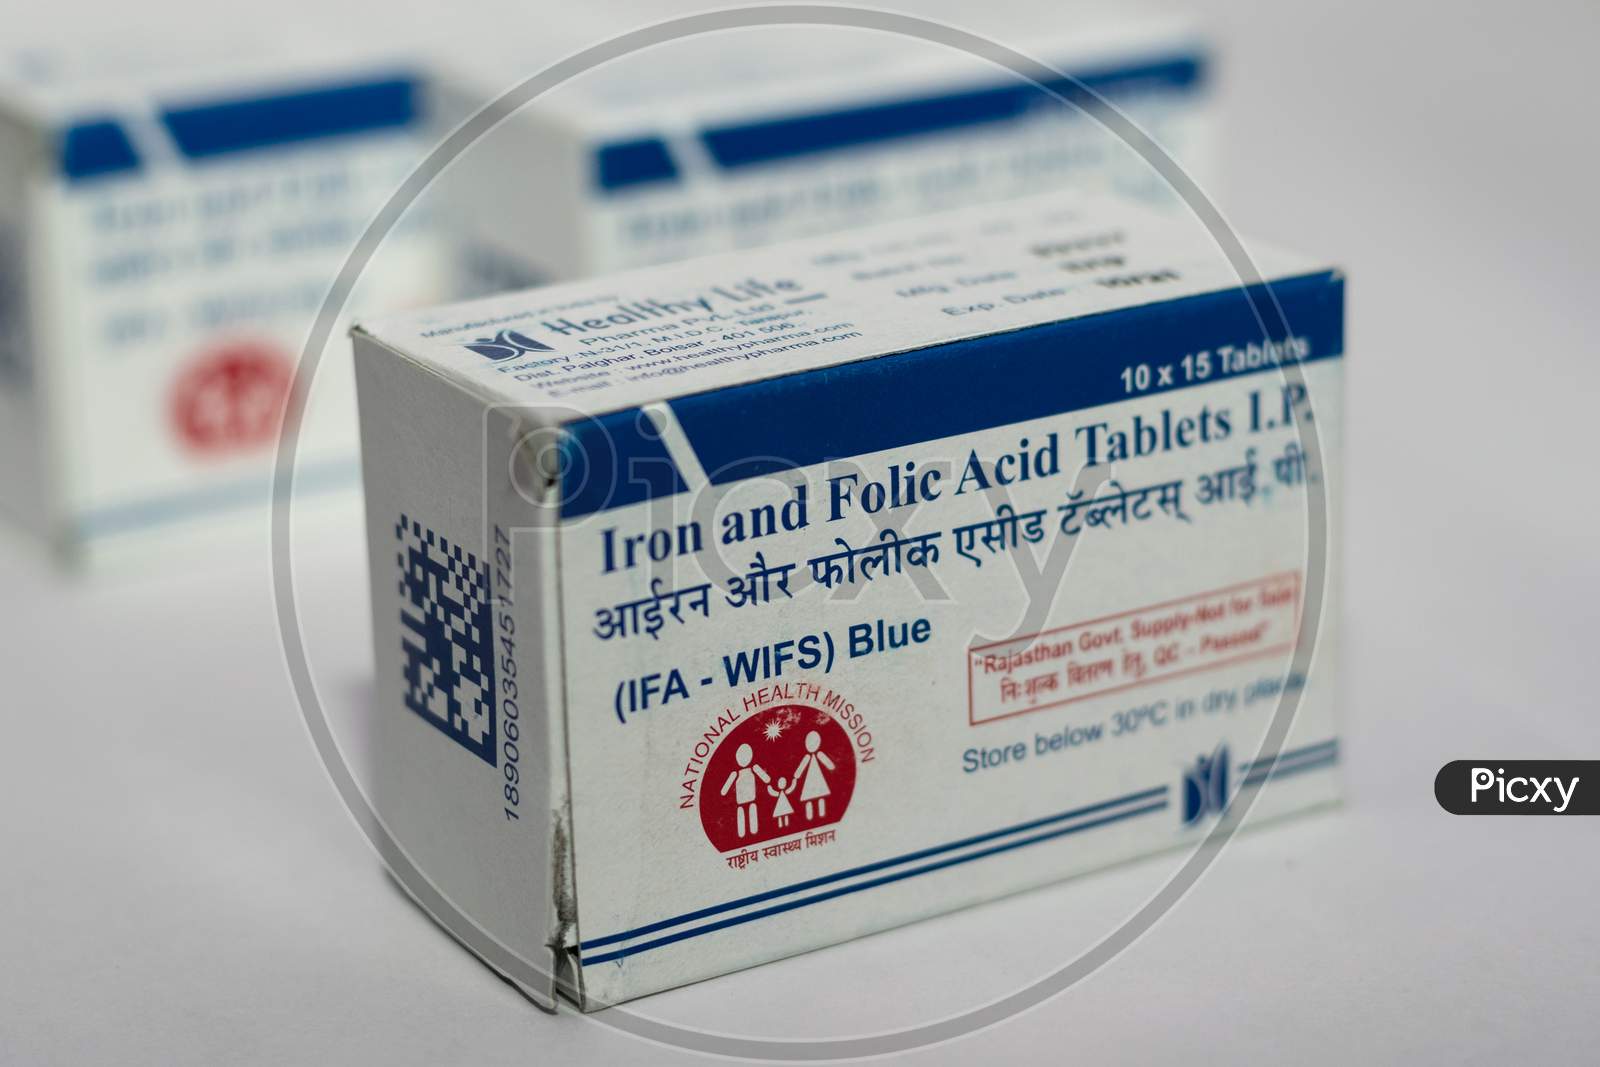 Iron and folic acid tablets provided free by government To reduce the prevalence and severity of anaemia in adolescent population (10-19 years)